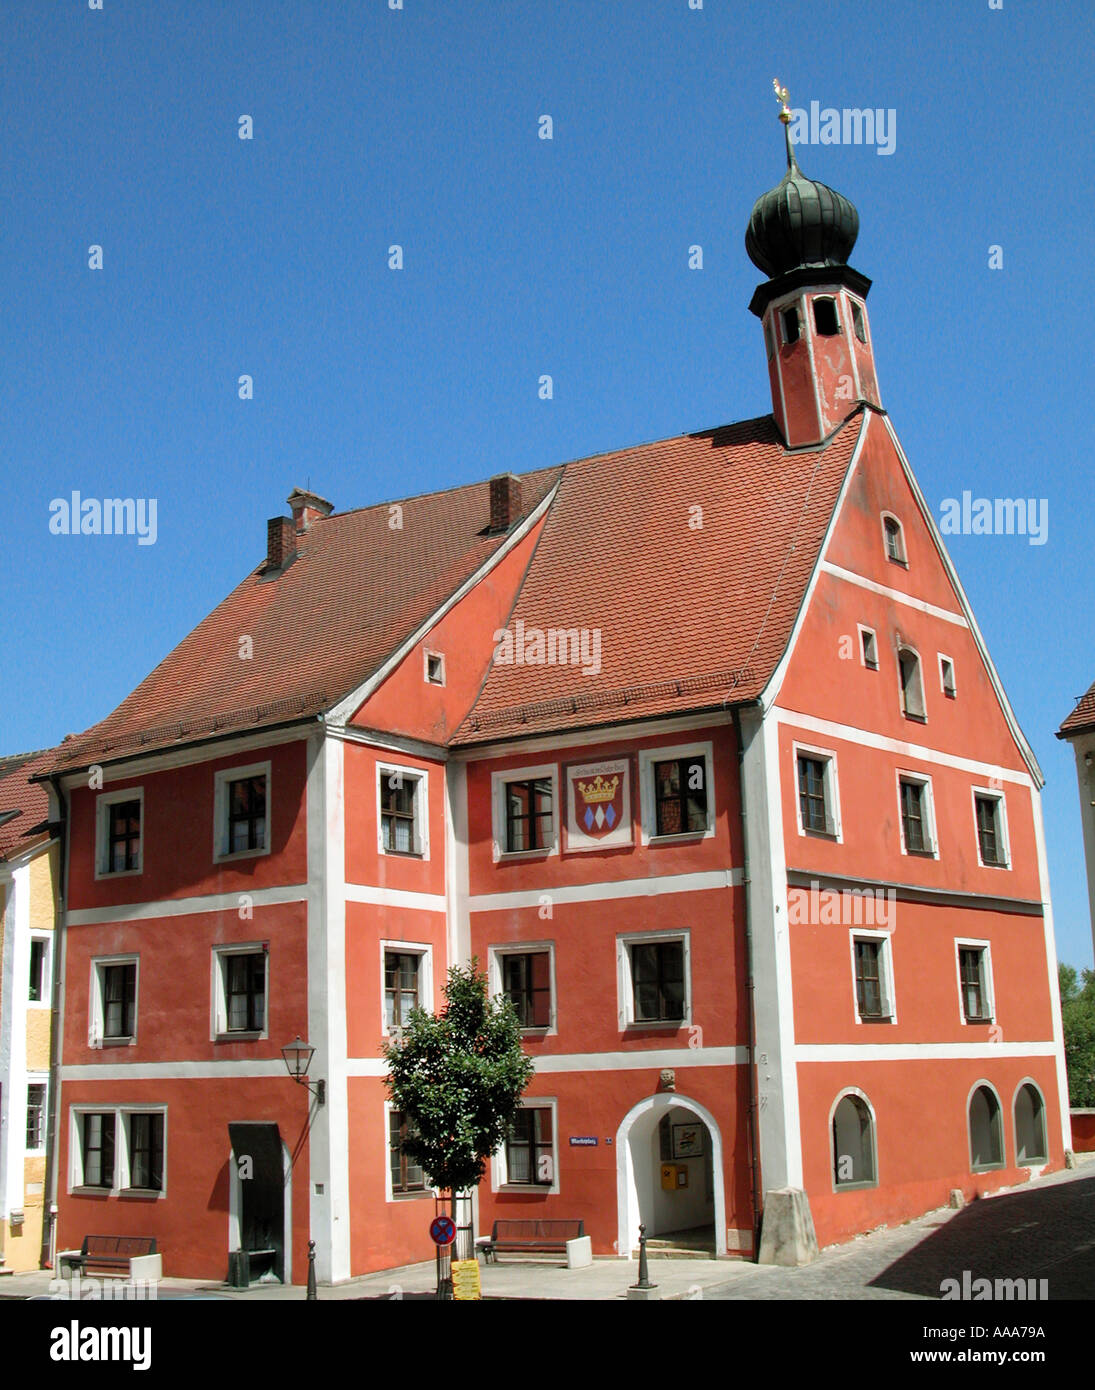 the very leaning townhall of KALLMUENZ Stock Photo